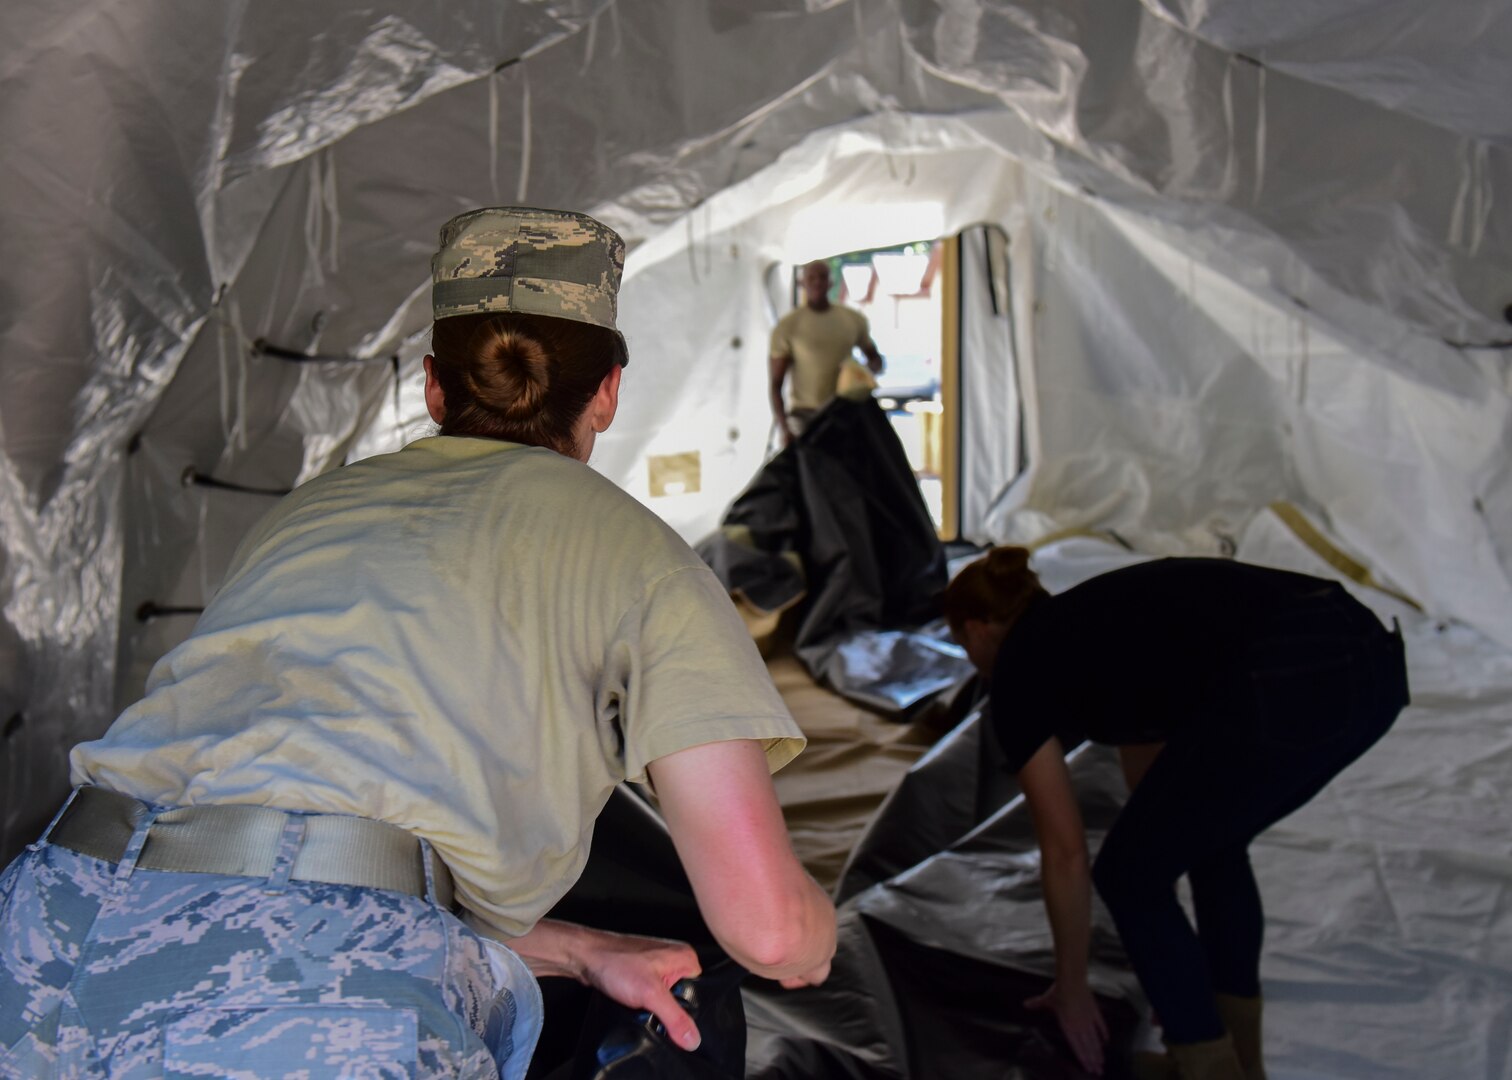 Expeditionary Medical Systems exercise volunteers fold tent equipment at Joint Base Langley-Eustis, Virginia, June 20, 2018. Airmen from the 633rd Civil Engineer Squadron, the 633rd Medical Support Squadron and the 633rd Dental Squadron volunteered to take part in the exercise. (U.S. Air Force photo by Airman 1st Class Monica Roybal)